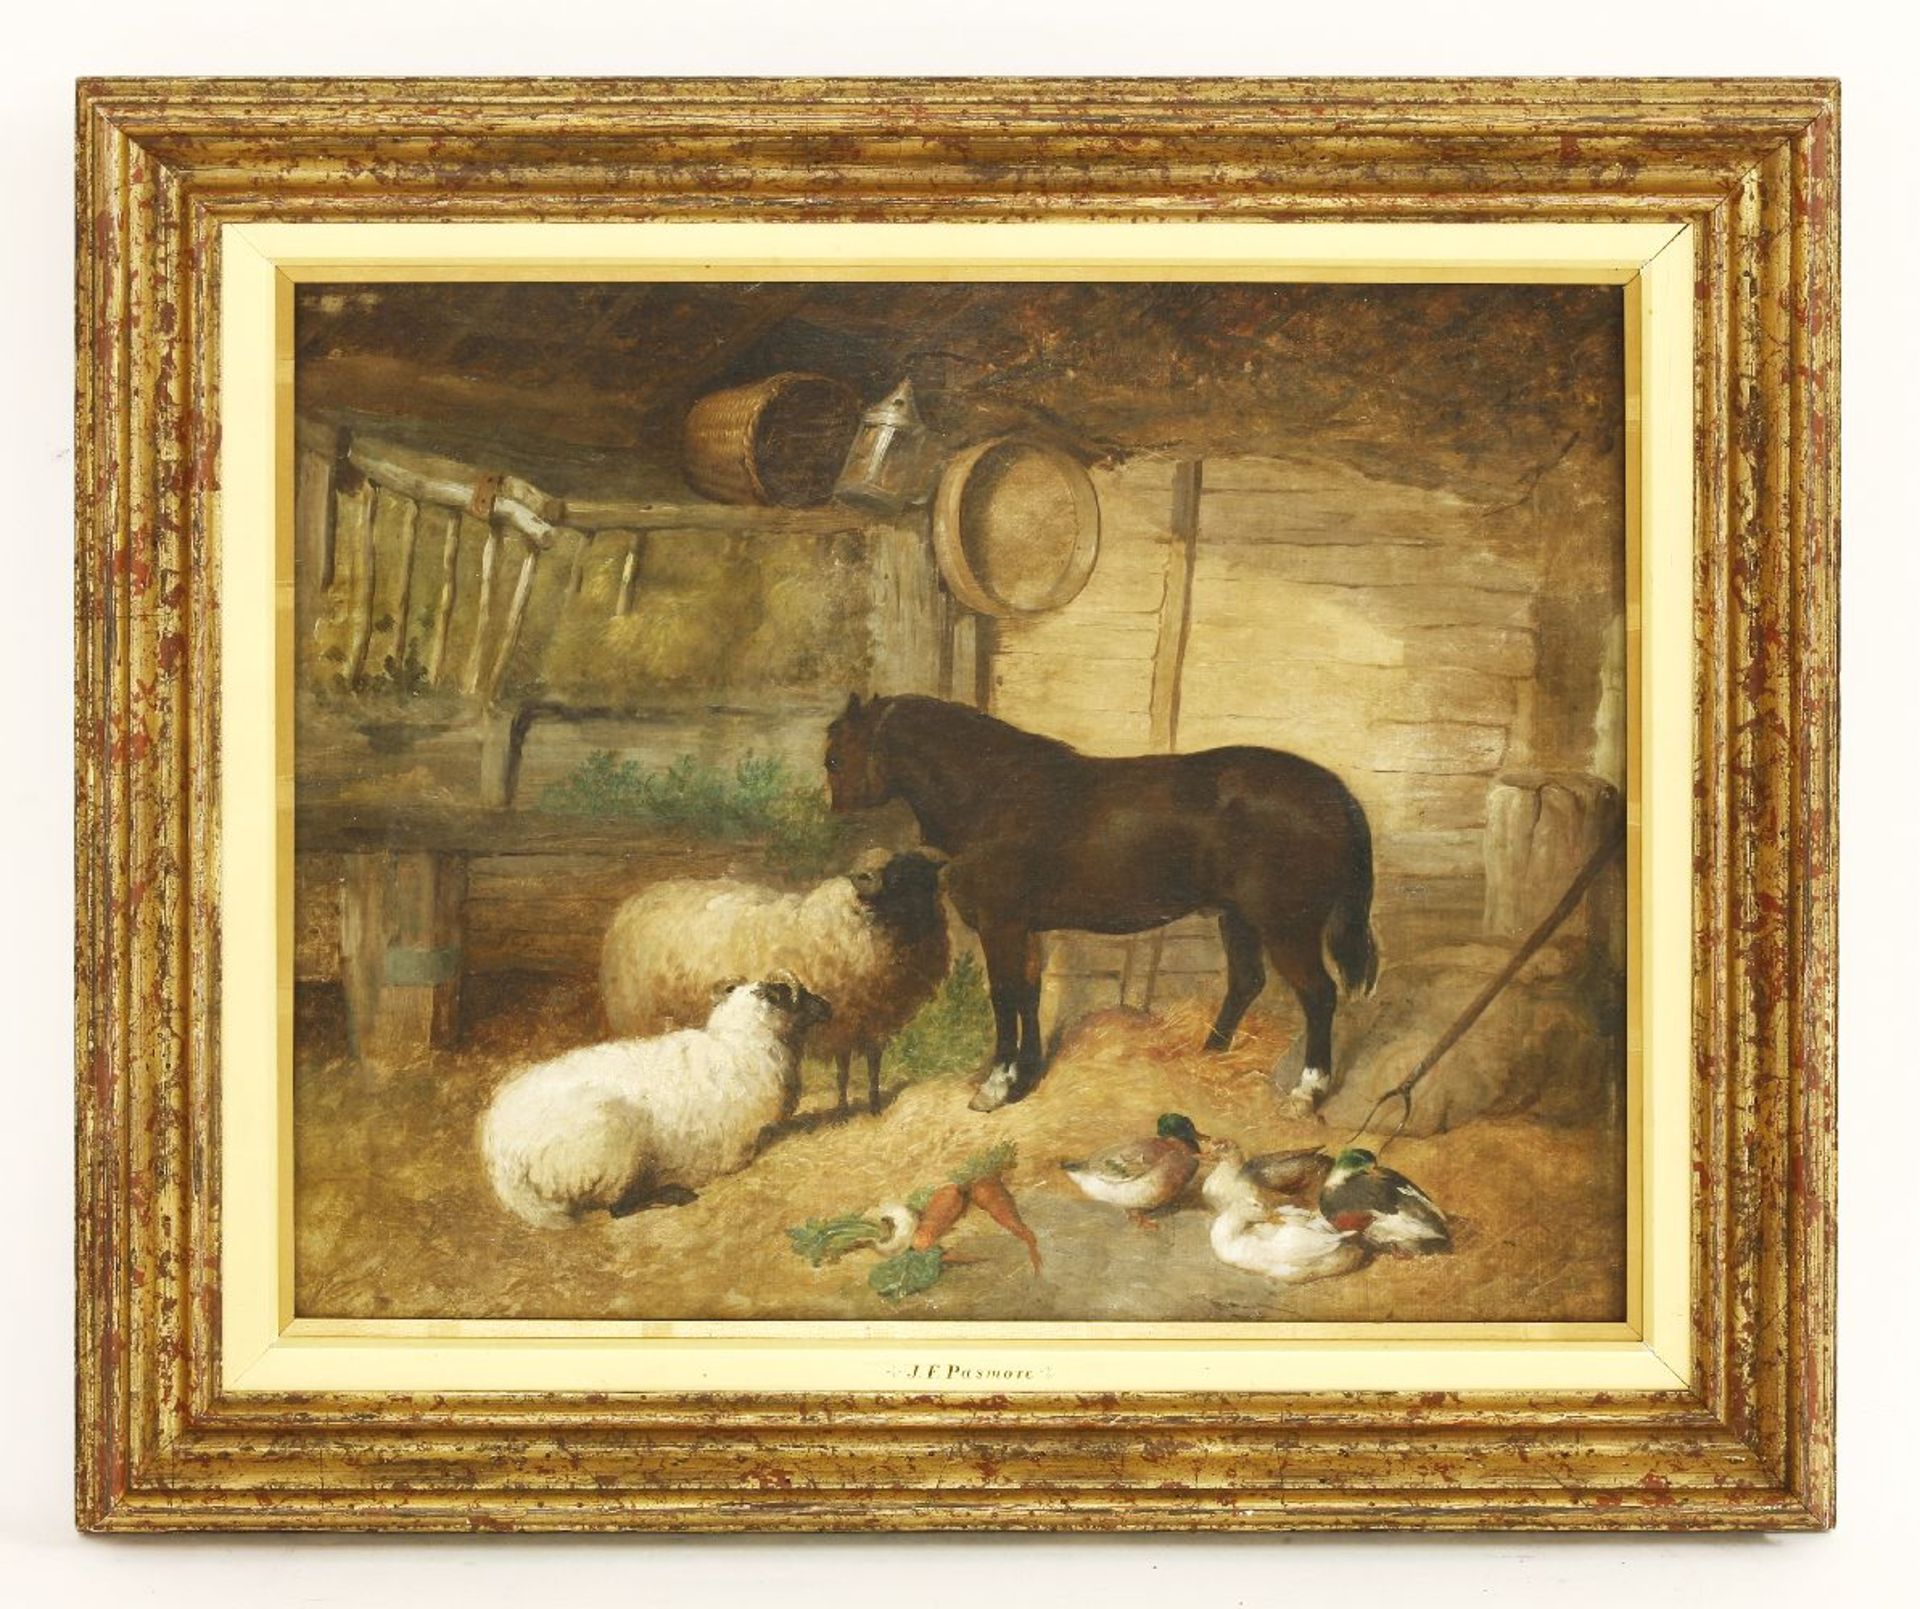 John Frederick Pasmore (1820-1881)FEEDING TIME AT THE STABLEOil on canvas43cm x 53cm - Image 2 of 3